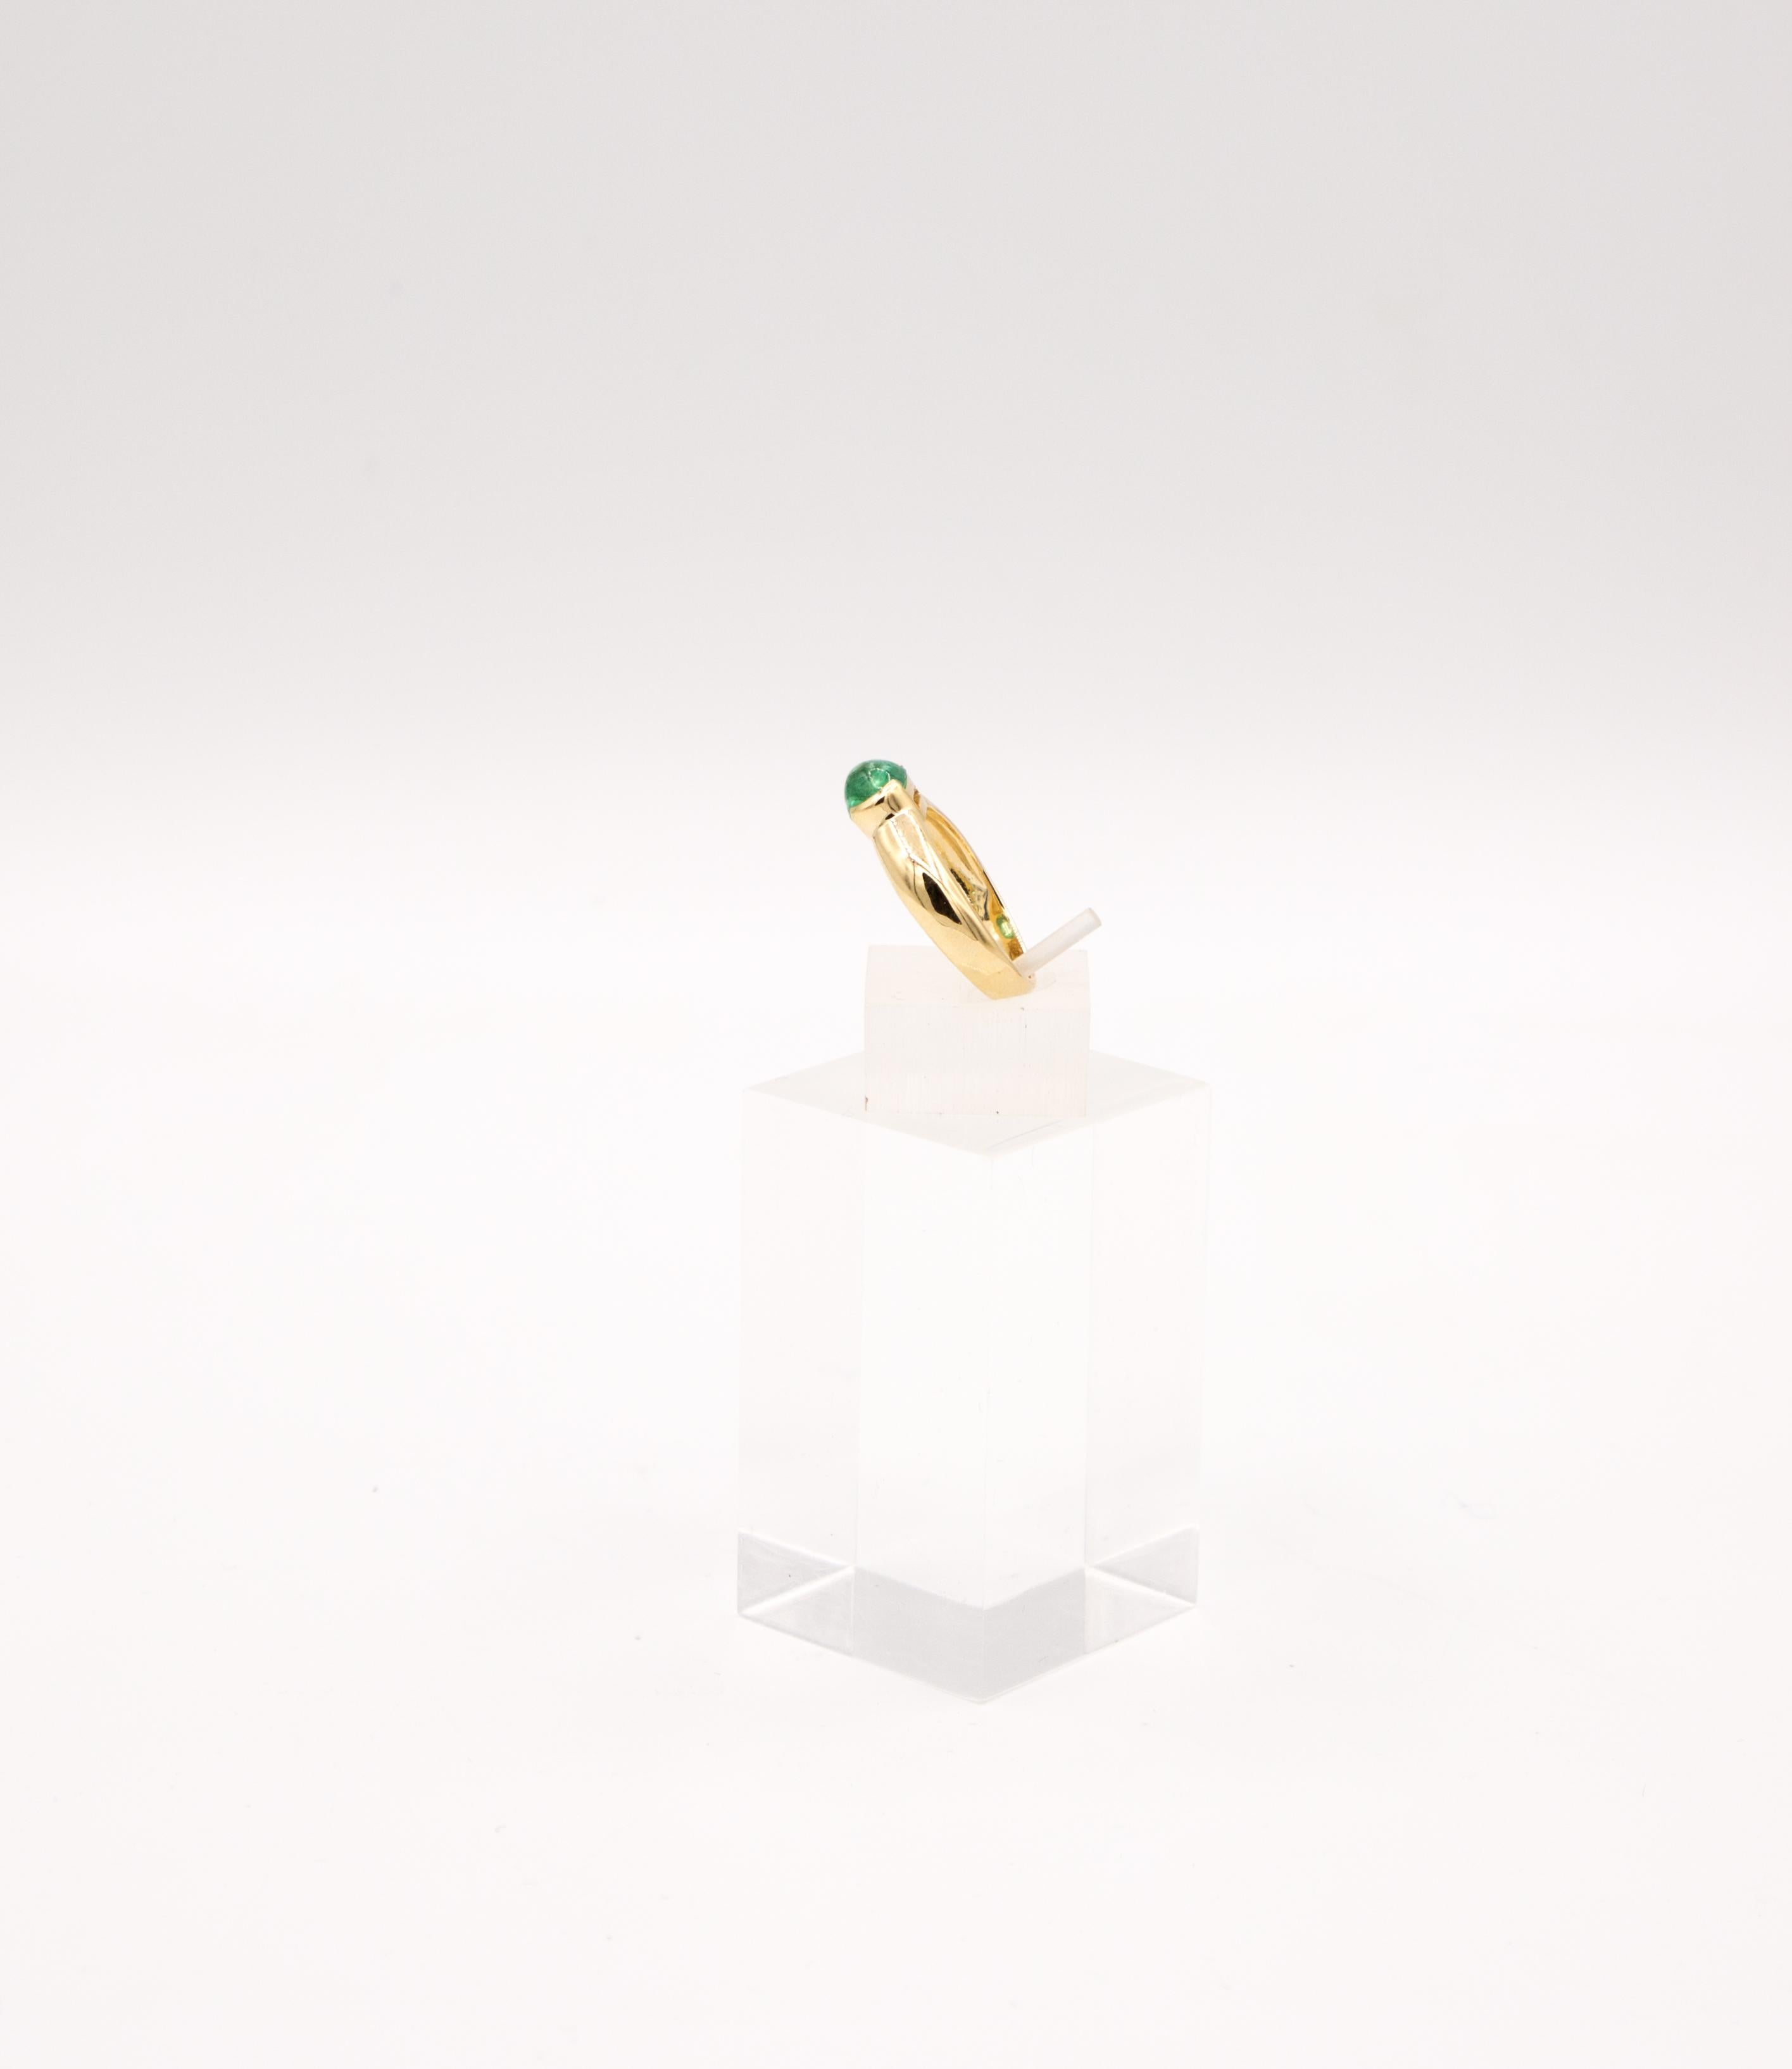 14 k yellow gold
1,64 ct emerald 
4,74 gram
size 56
this is a classic band ring you can wear every day it never will go out of fashion 